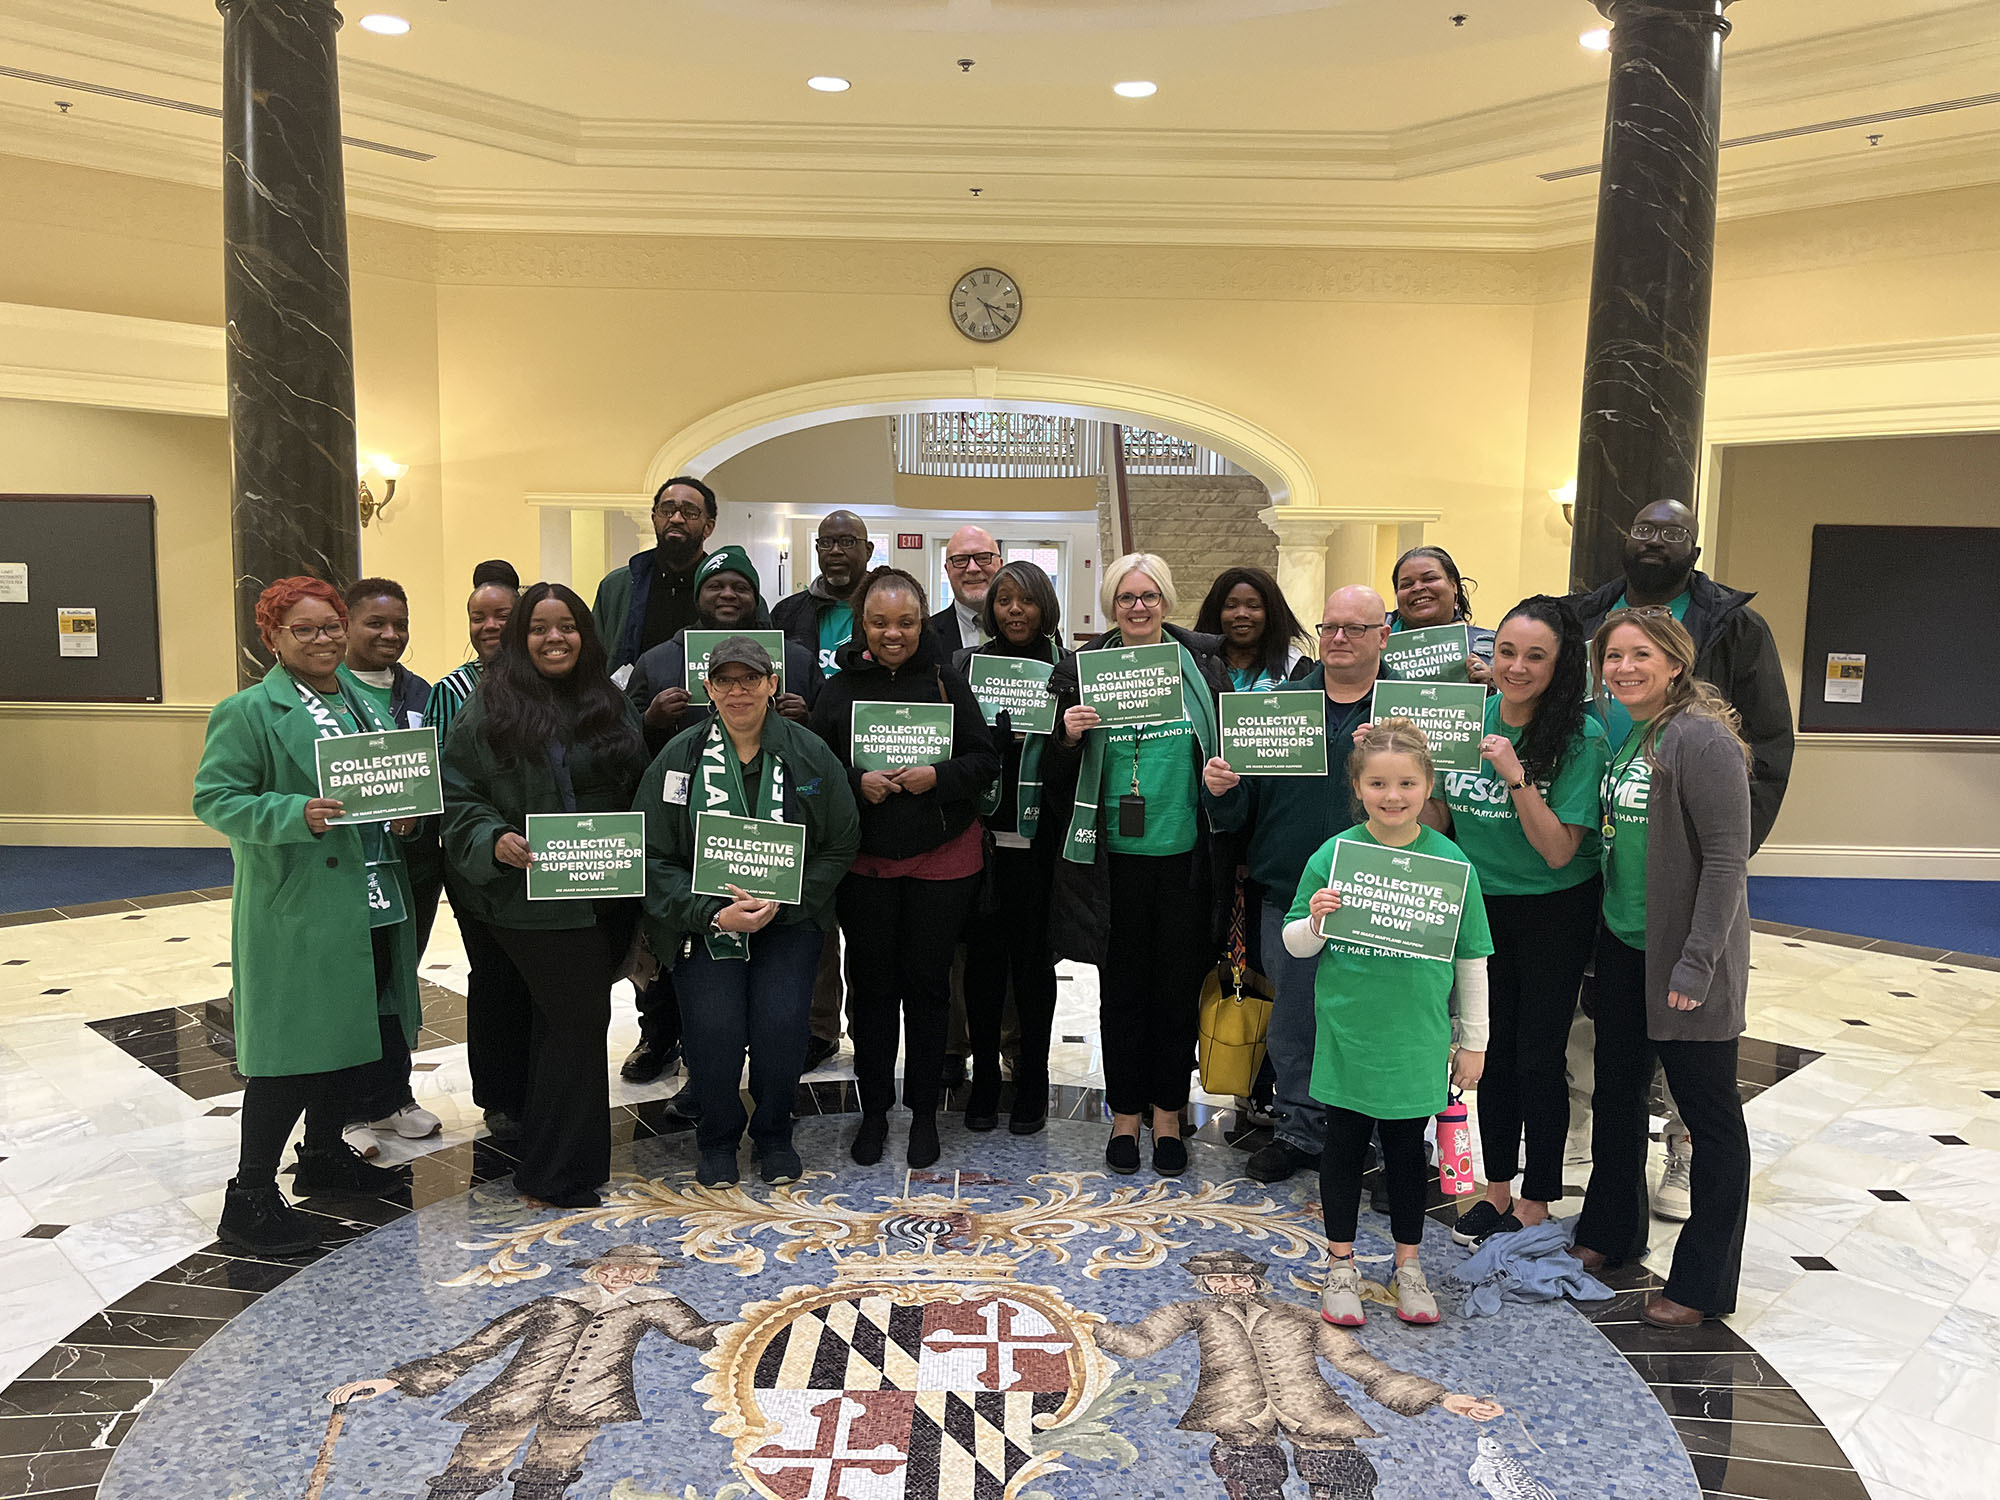 AFSCME supervisors members at the State House after testifying in support of the supervisors collective bargaining bill